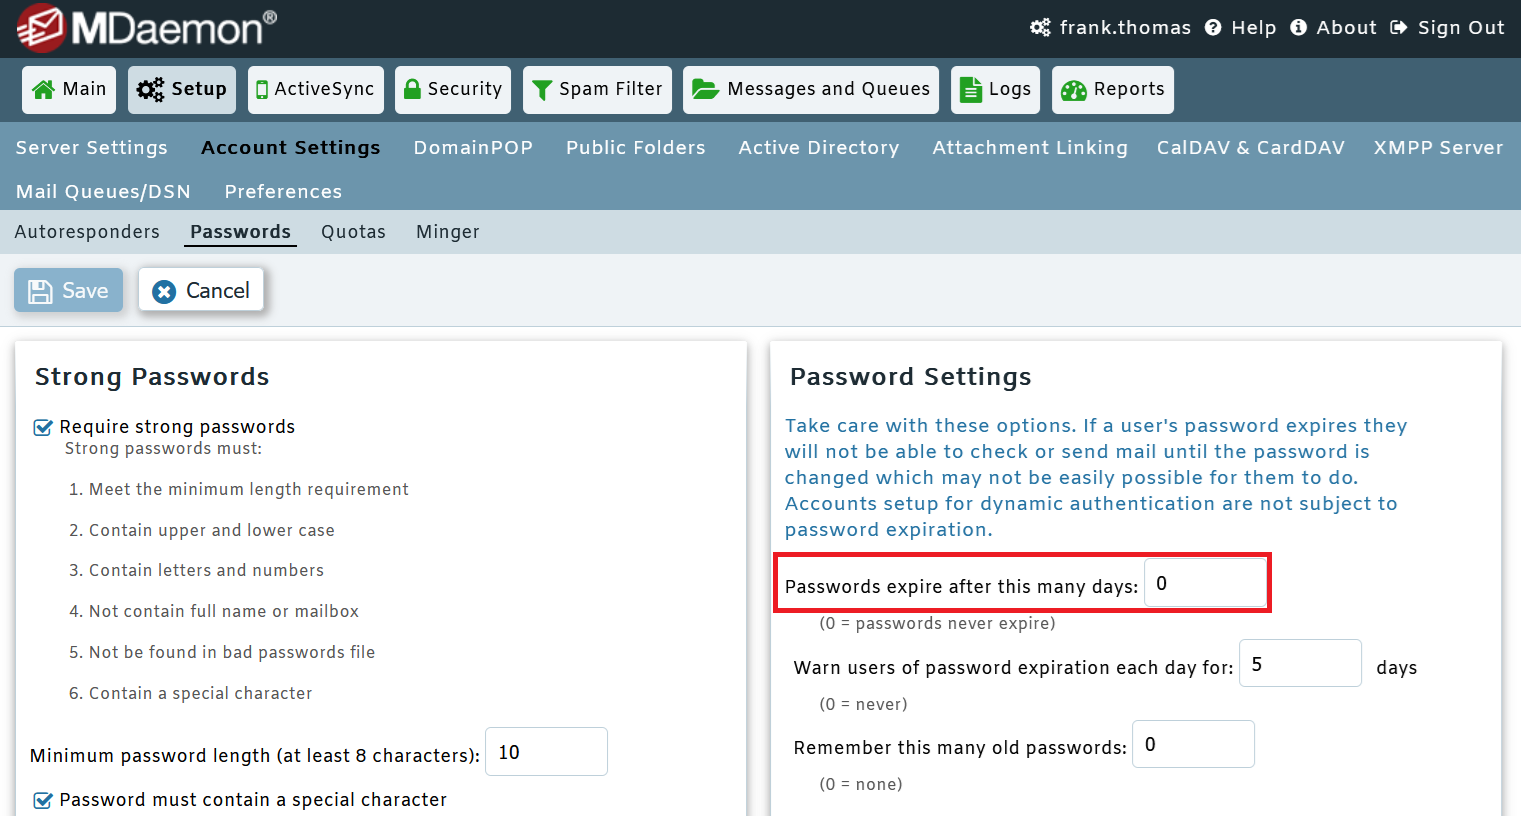 Password expiration settings in MDaemon Email Server - MDaemon Remote Administration